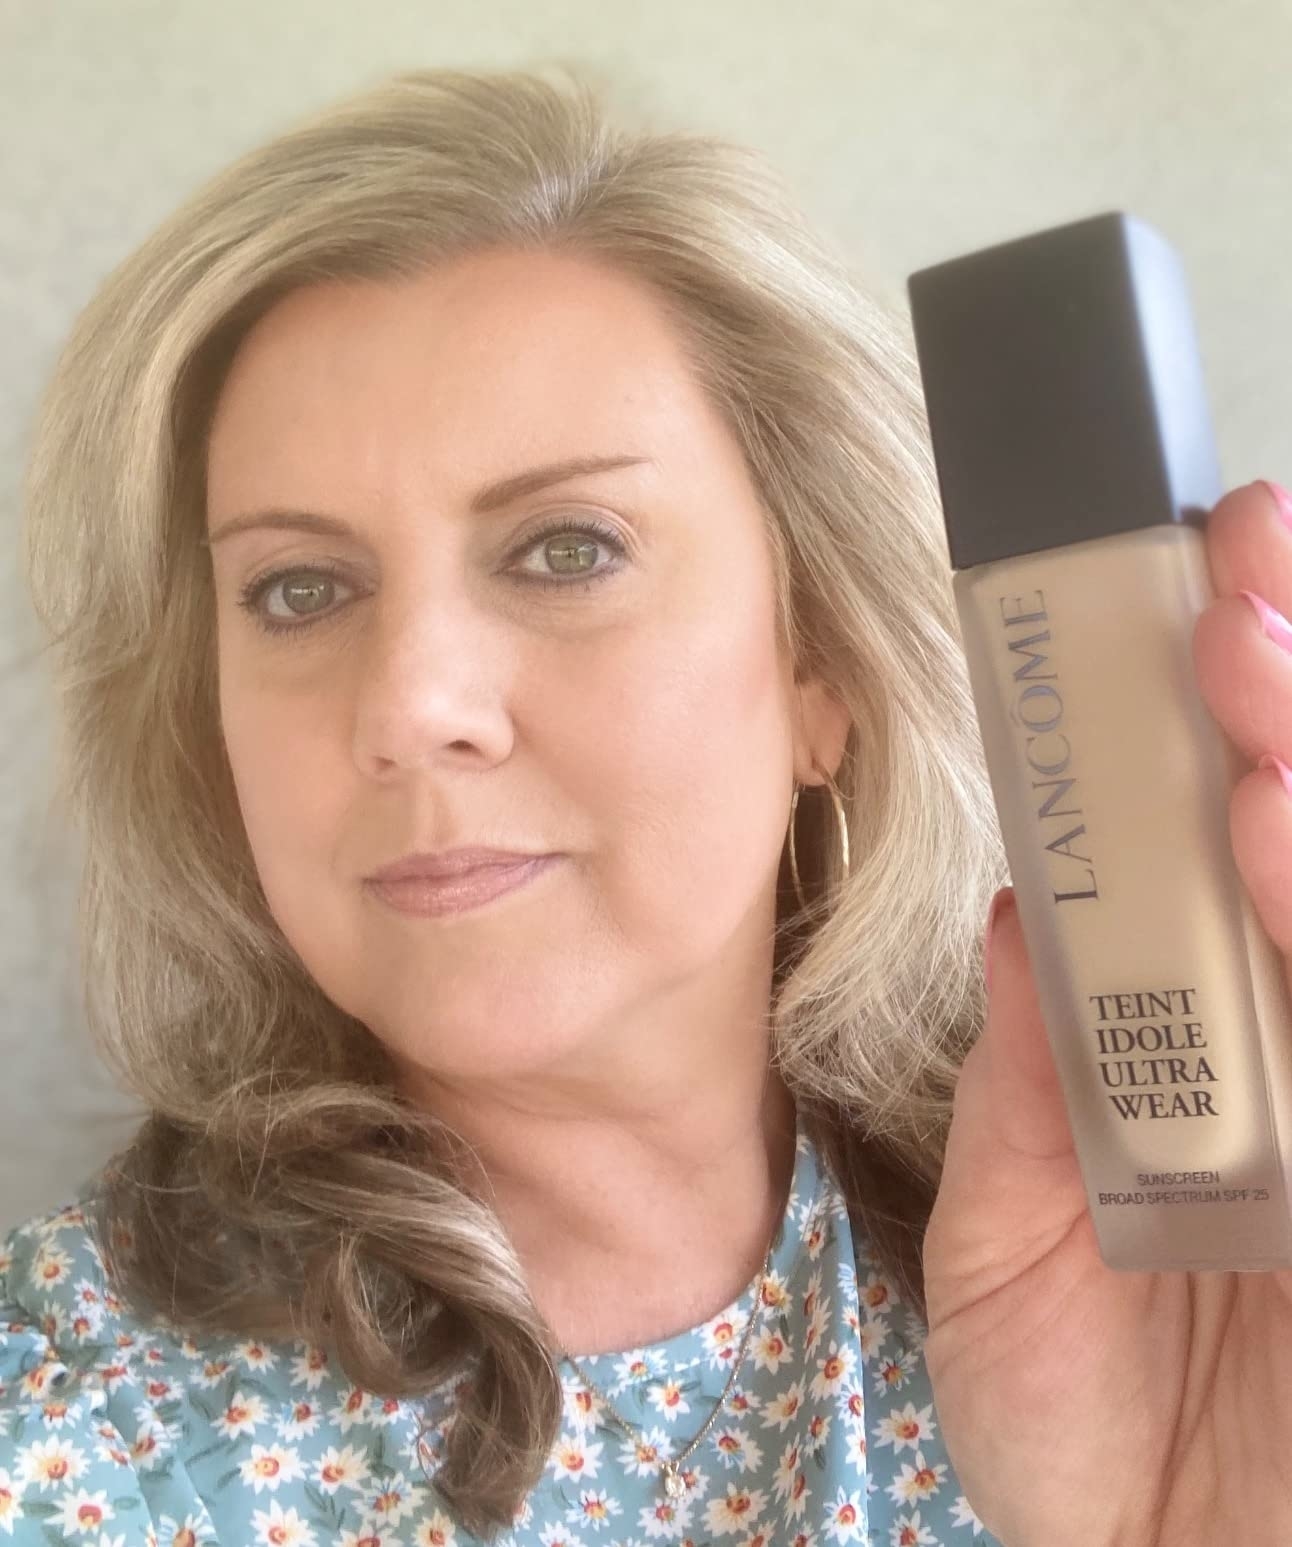 a reviewer wearing the foundation and holding the bottle of it